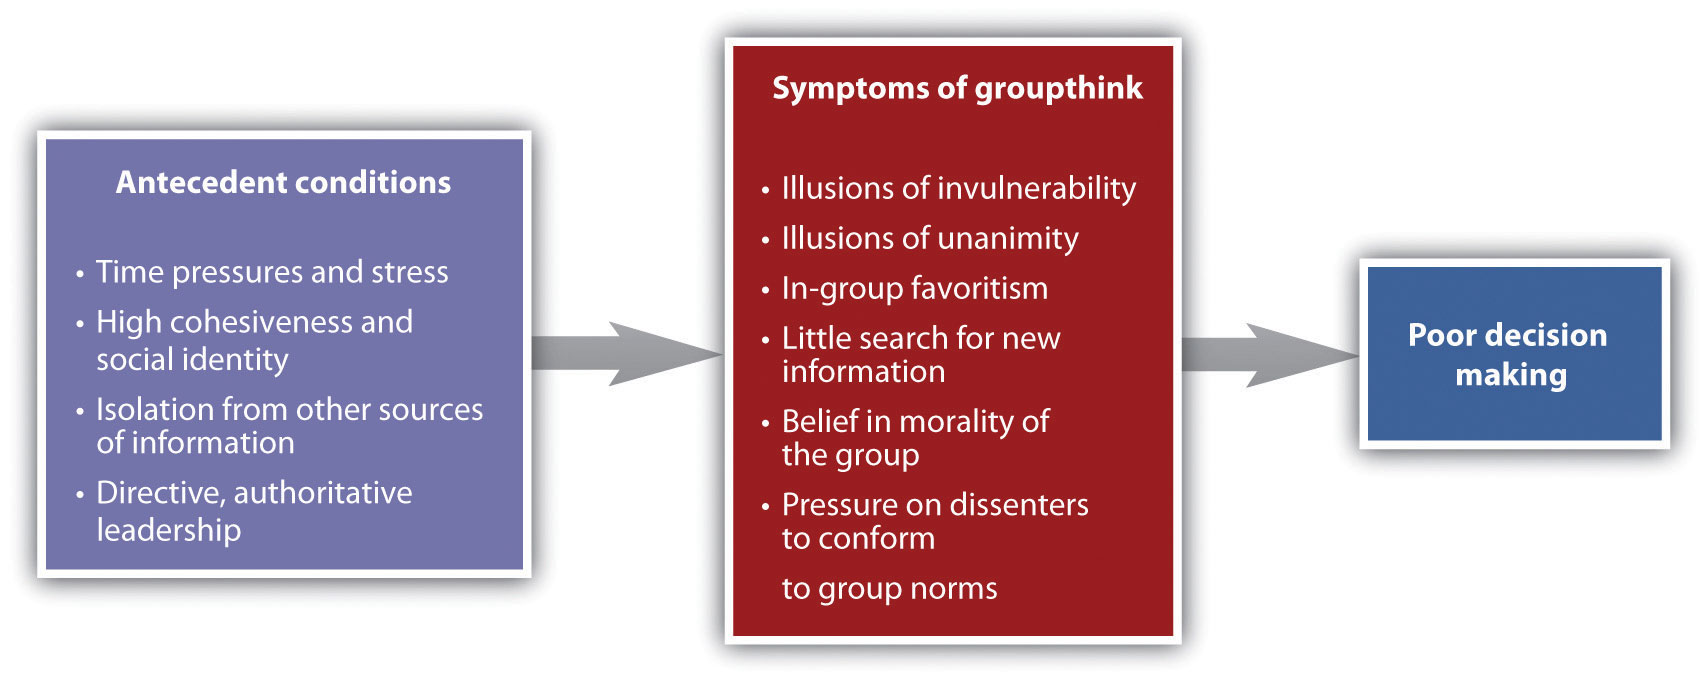 Groupthink: Definition, Signs, Examples, and How to Avoid It